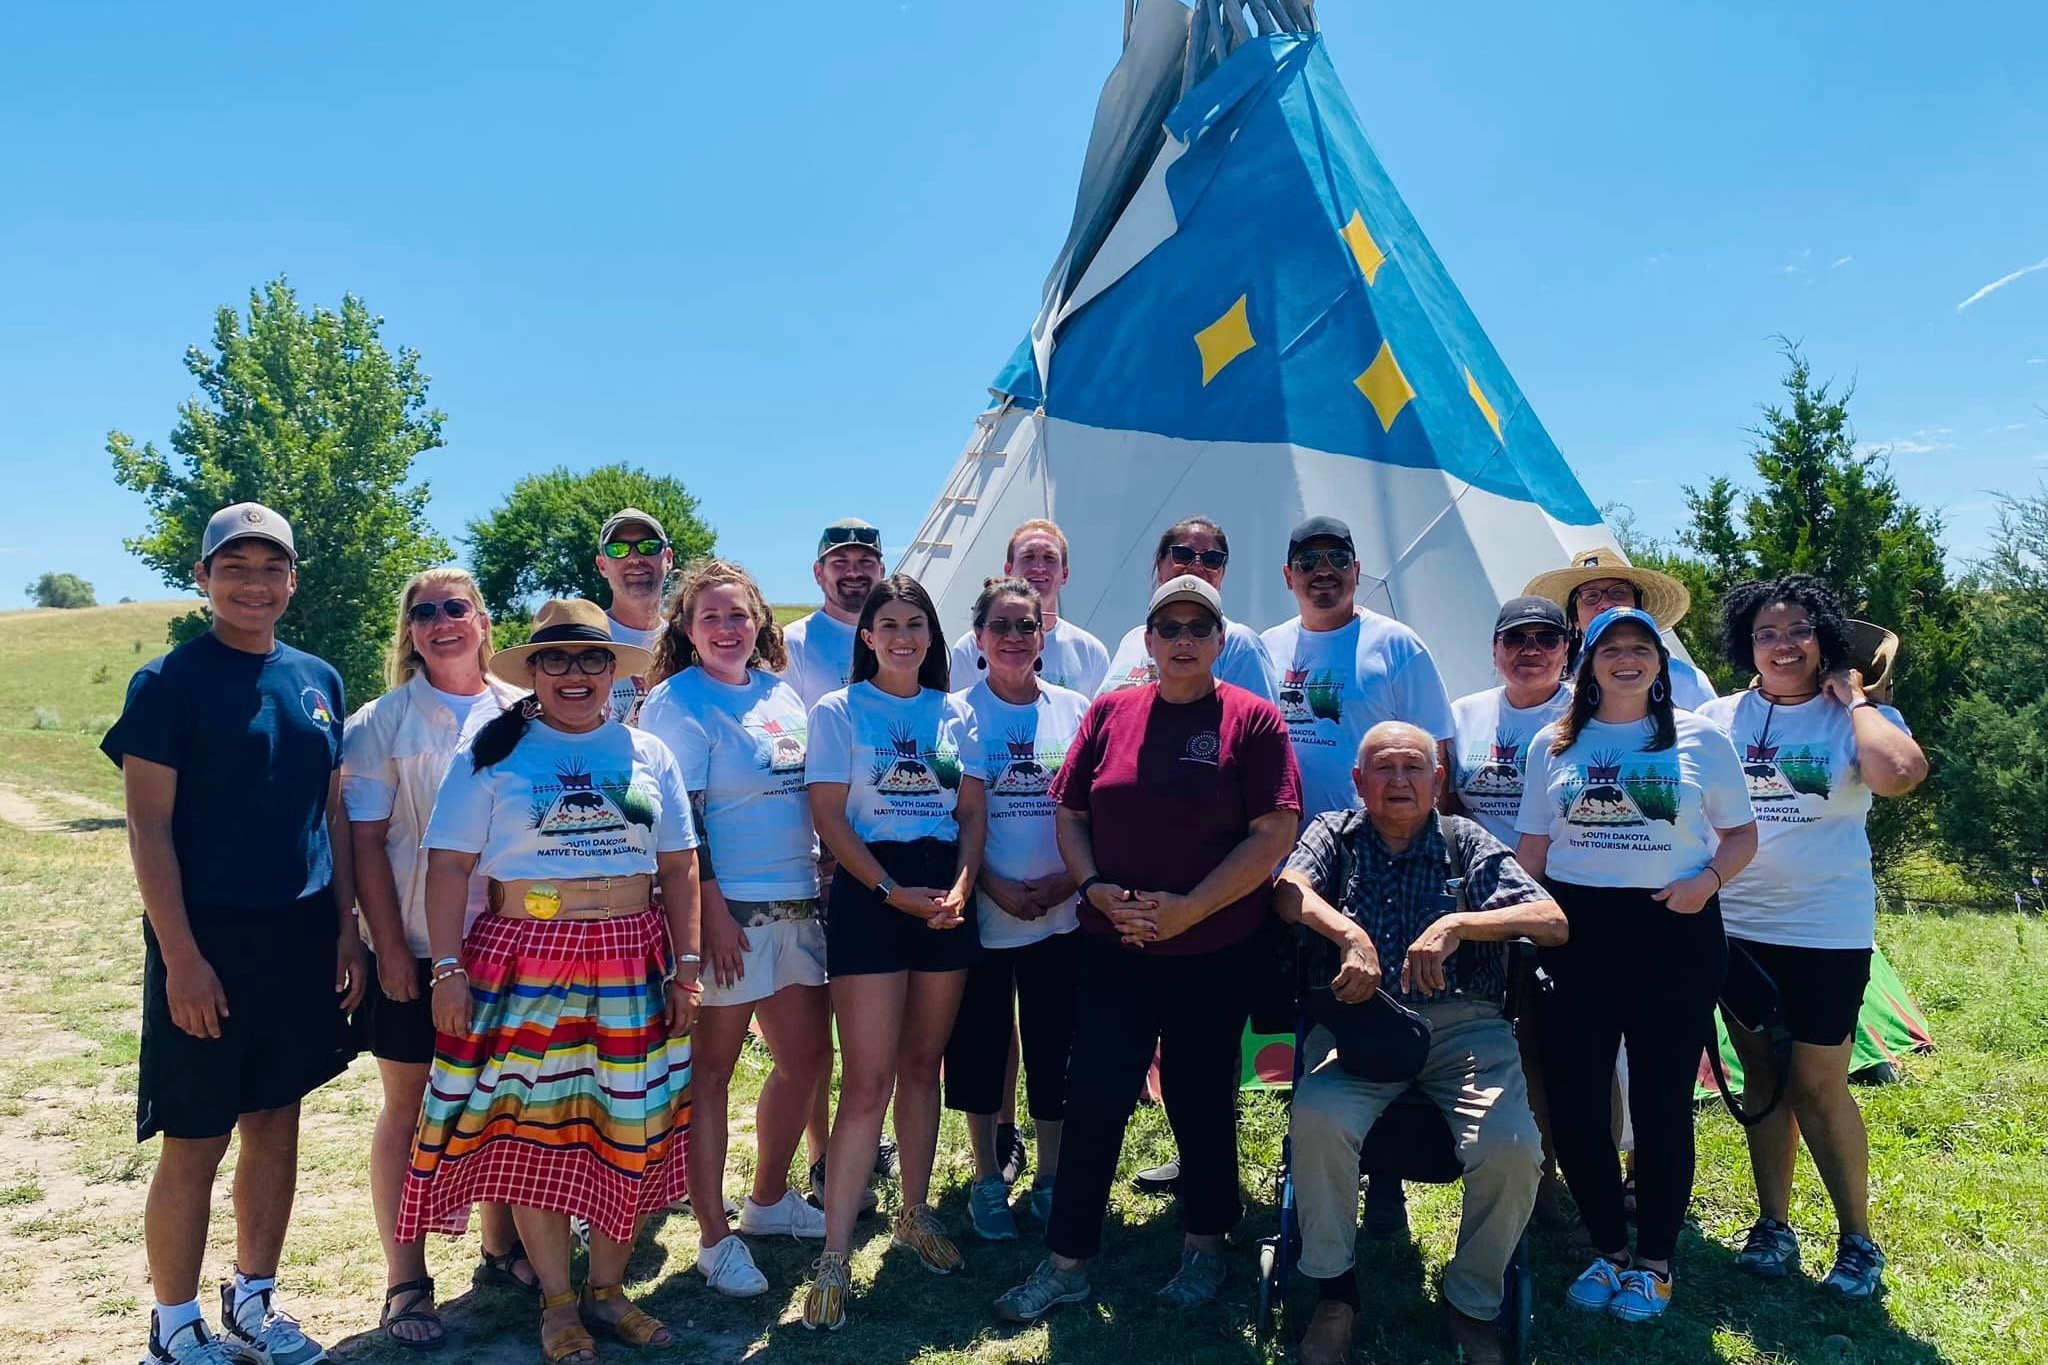 A group of approximately 20 people stand and pose for a photo outdoors. They wear matching shirts that read "South Dakota Native Tourism Alliance." The landscape is has grass and trees. A tepee can be seen behind the group.